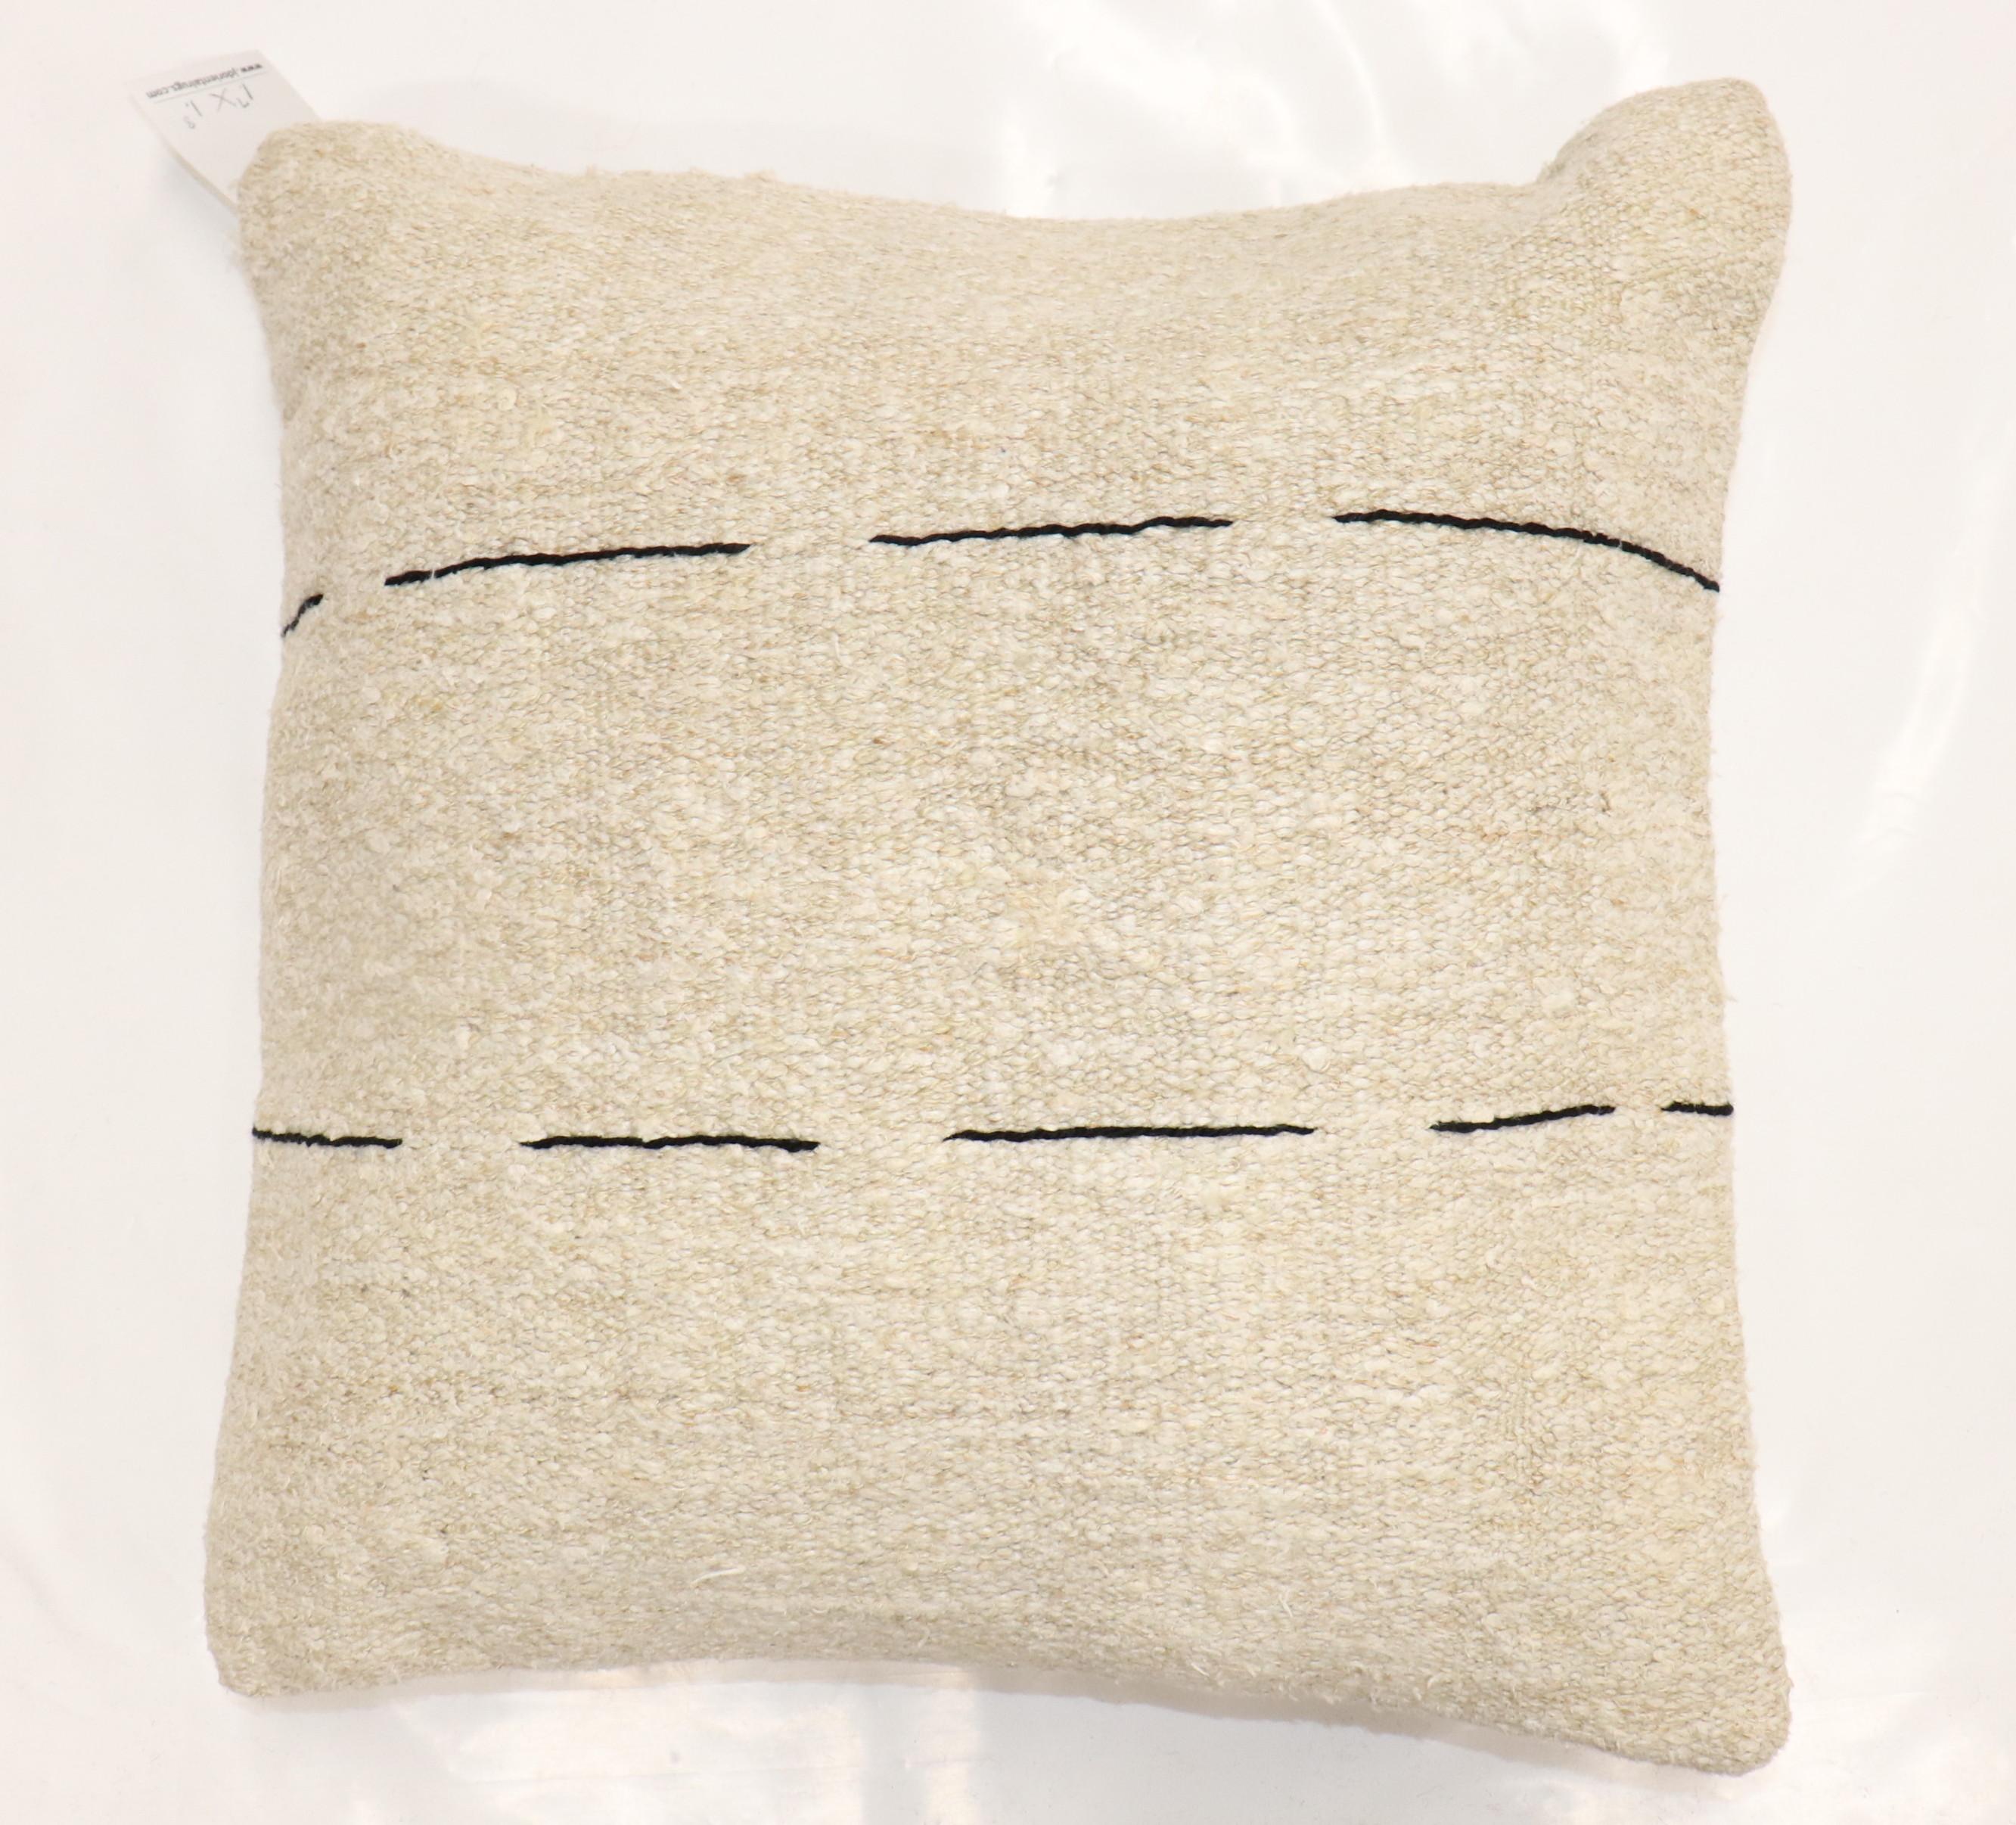  Hemp Minimalist Large Square Turkish Kilim Pillow In Good Condition For Sale In New York, NY